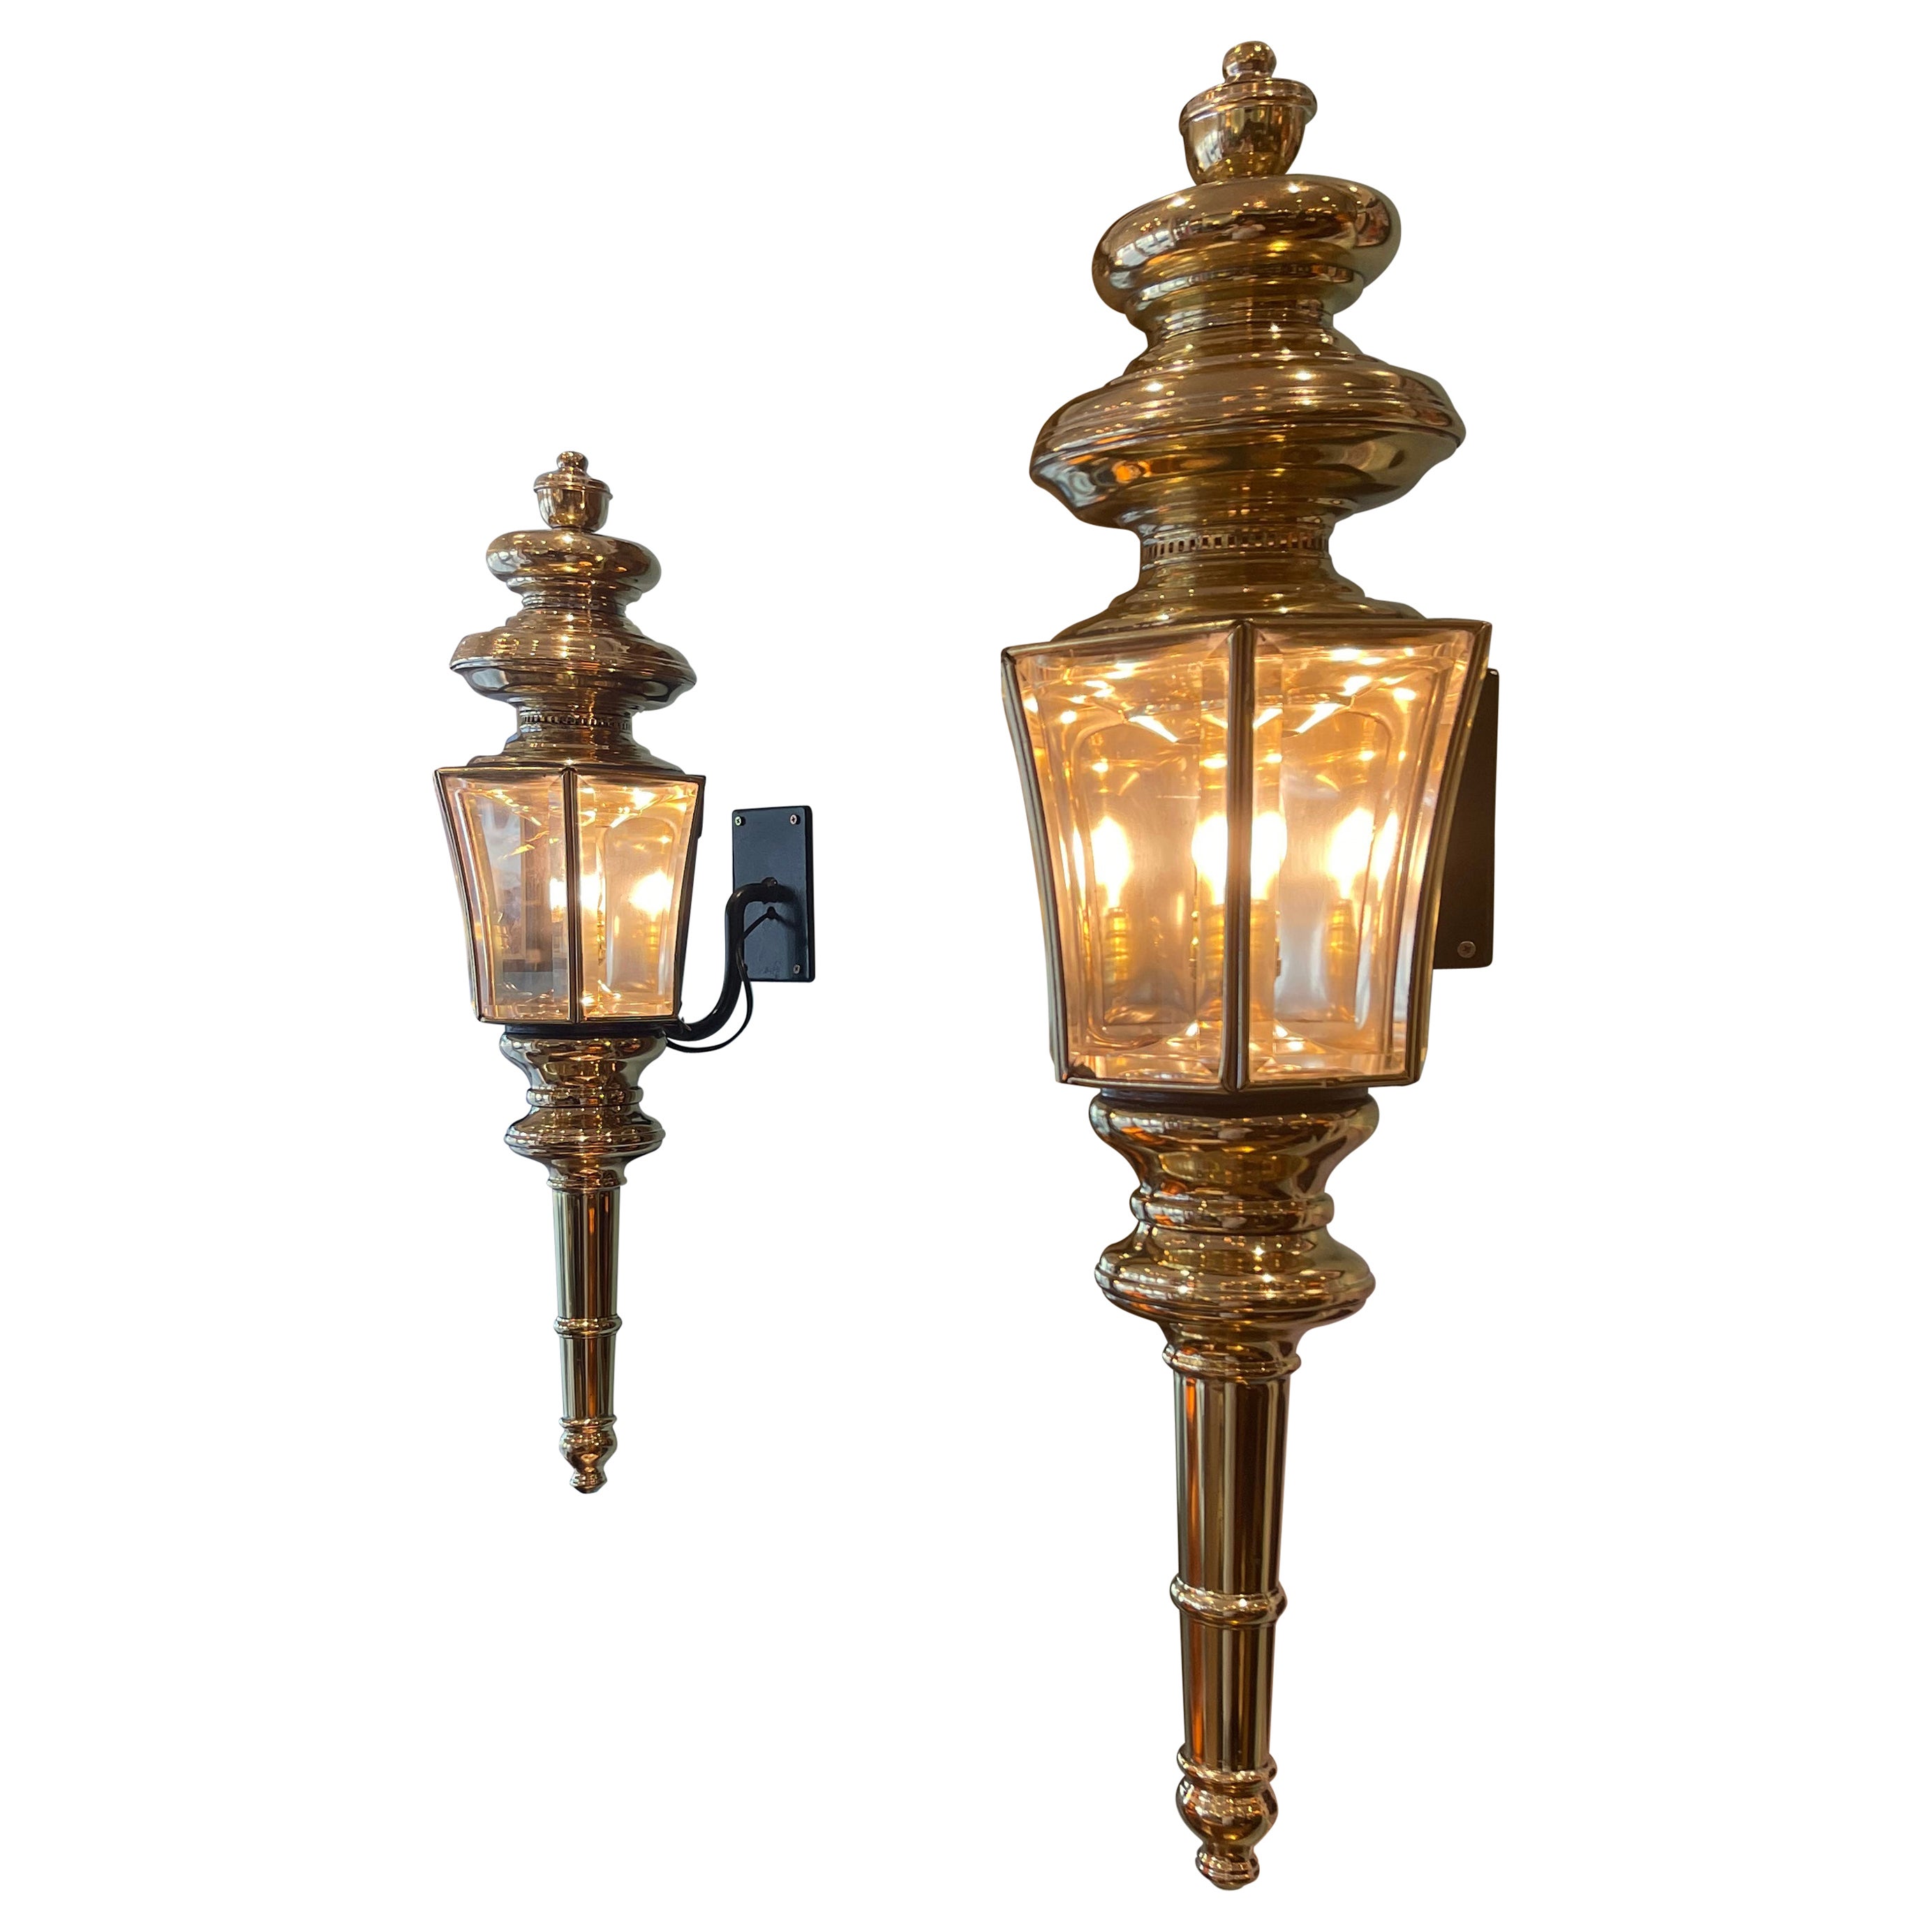 Pair of 6 Sided Beveled Glass Coach Lamps Late 19th Century For Sale